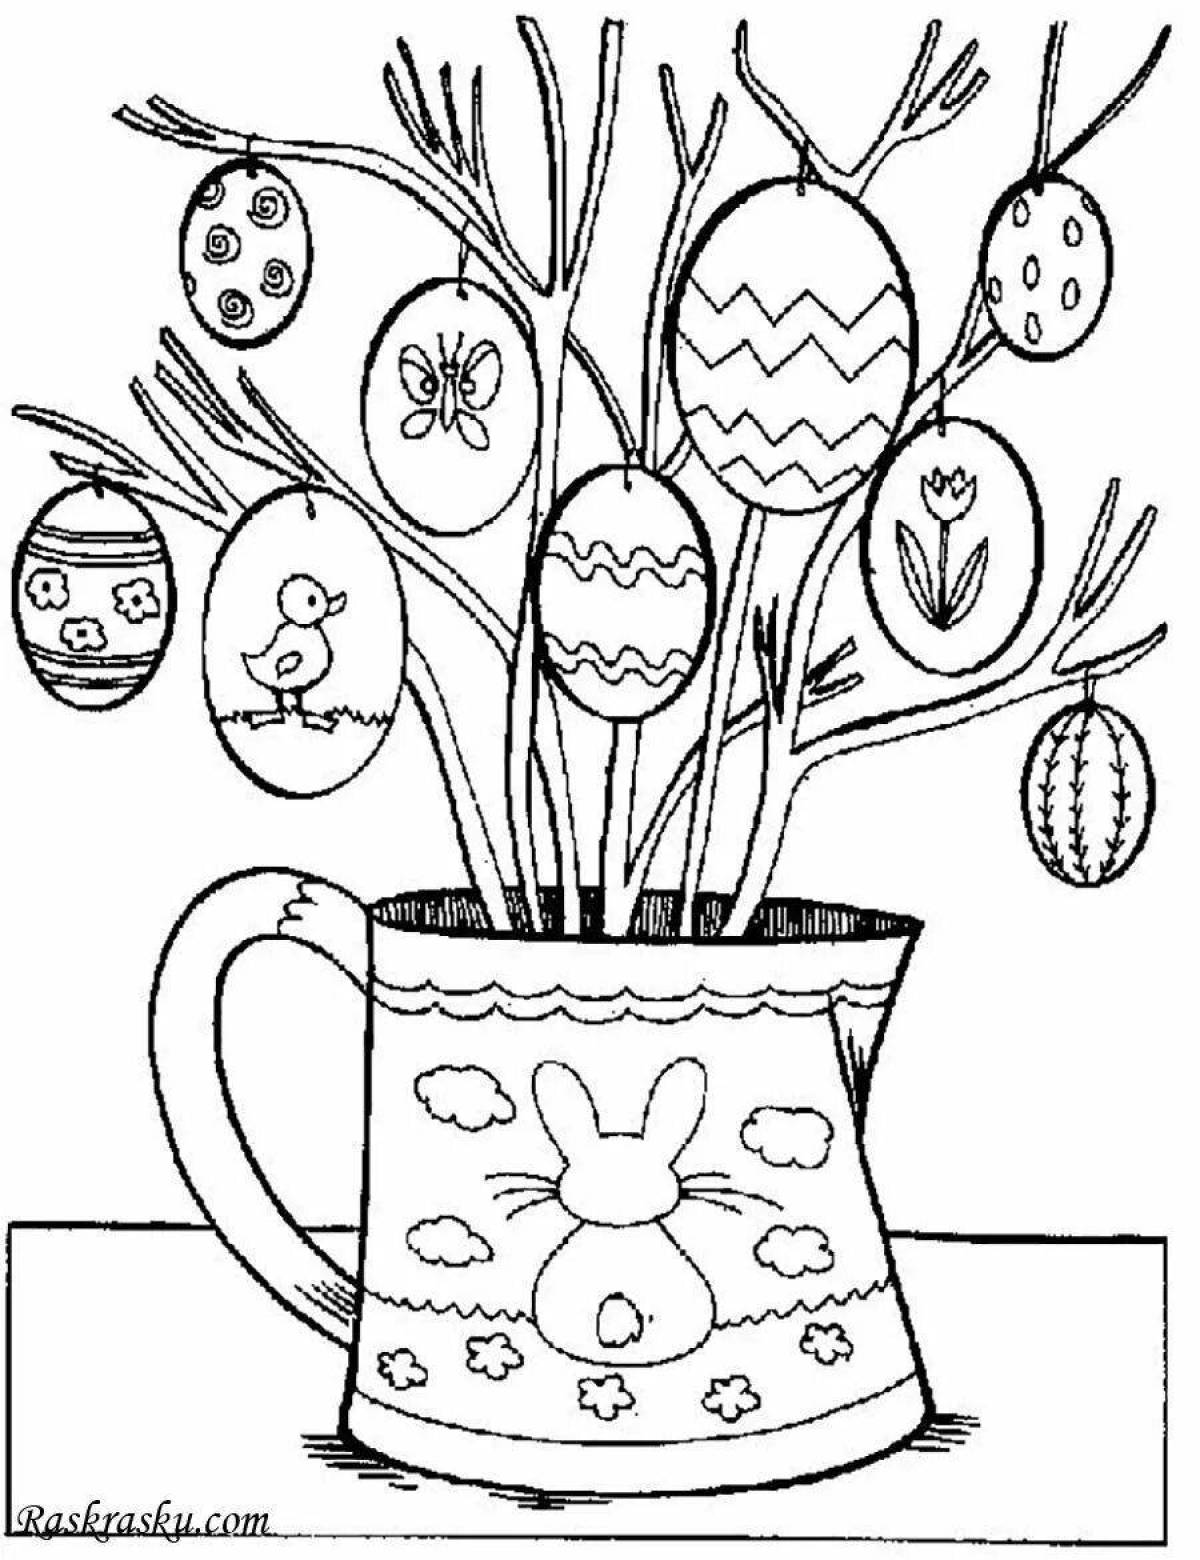 Bright Easter coloring book for kids